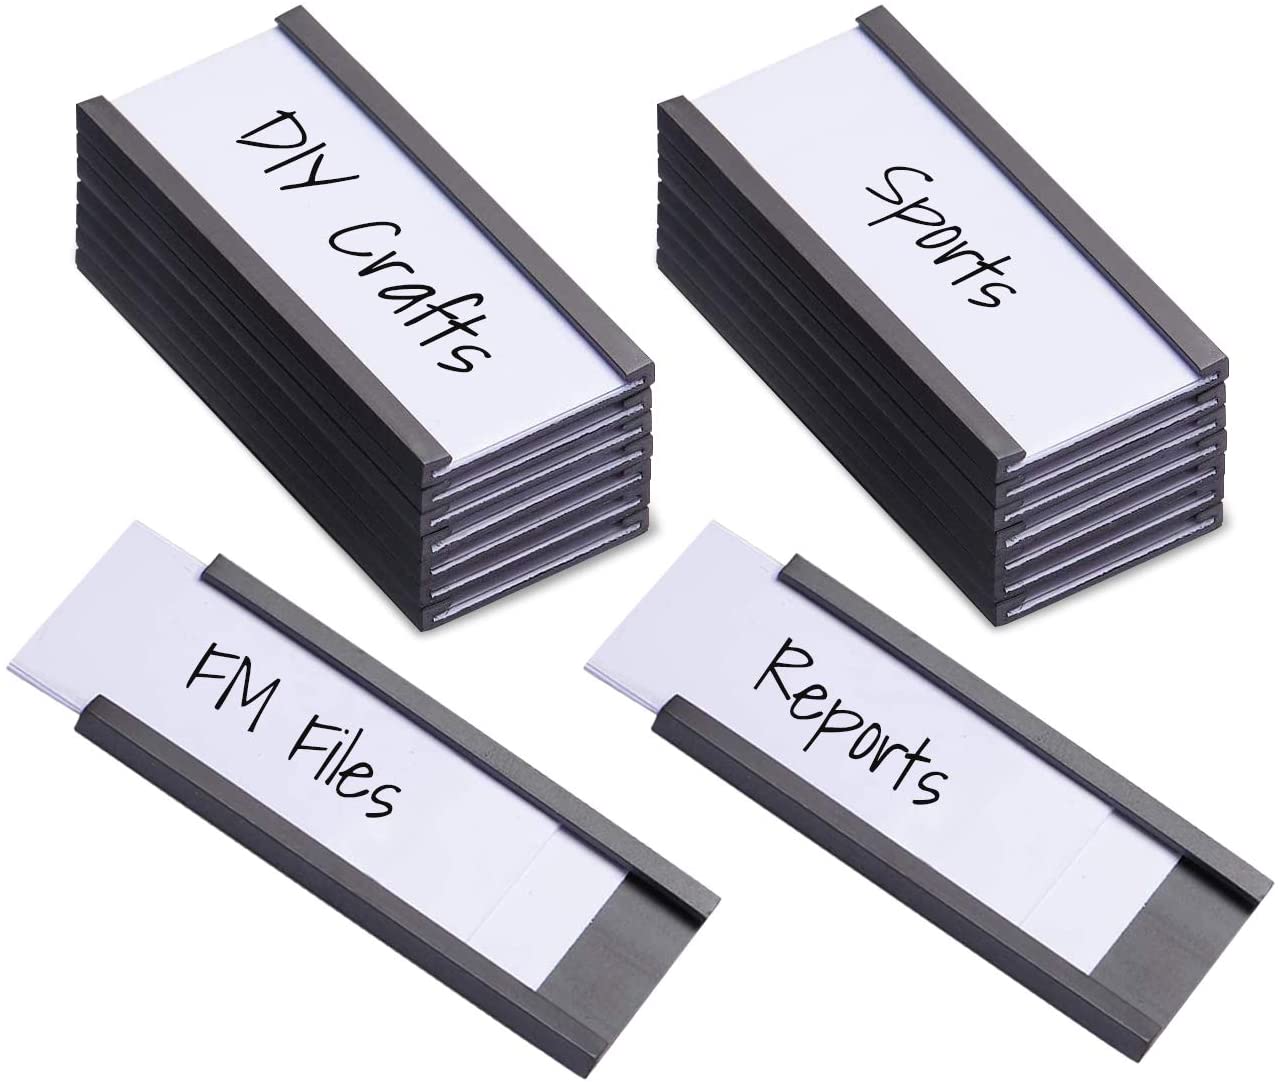 Reusable Magnetic Racking Label size 150x50mm $48.50/50 free whiteboard marker 